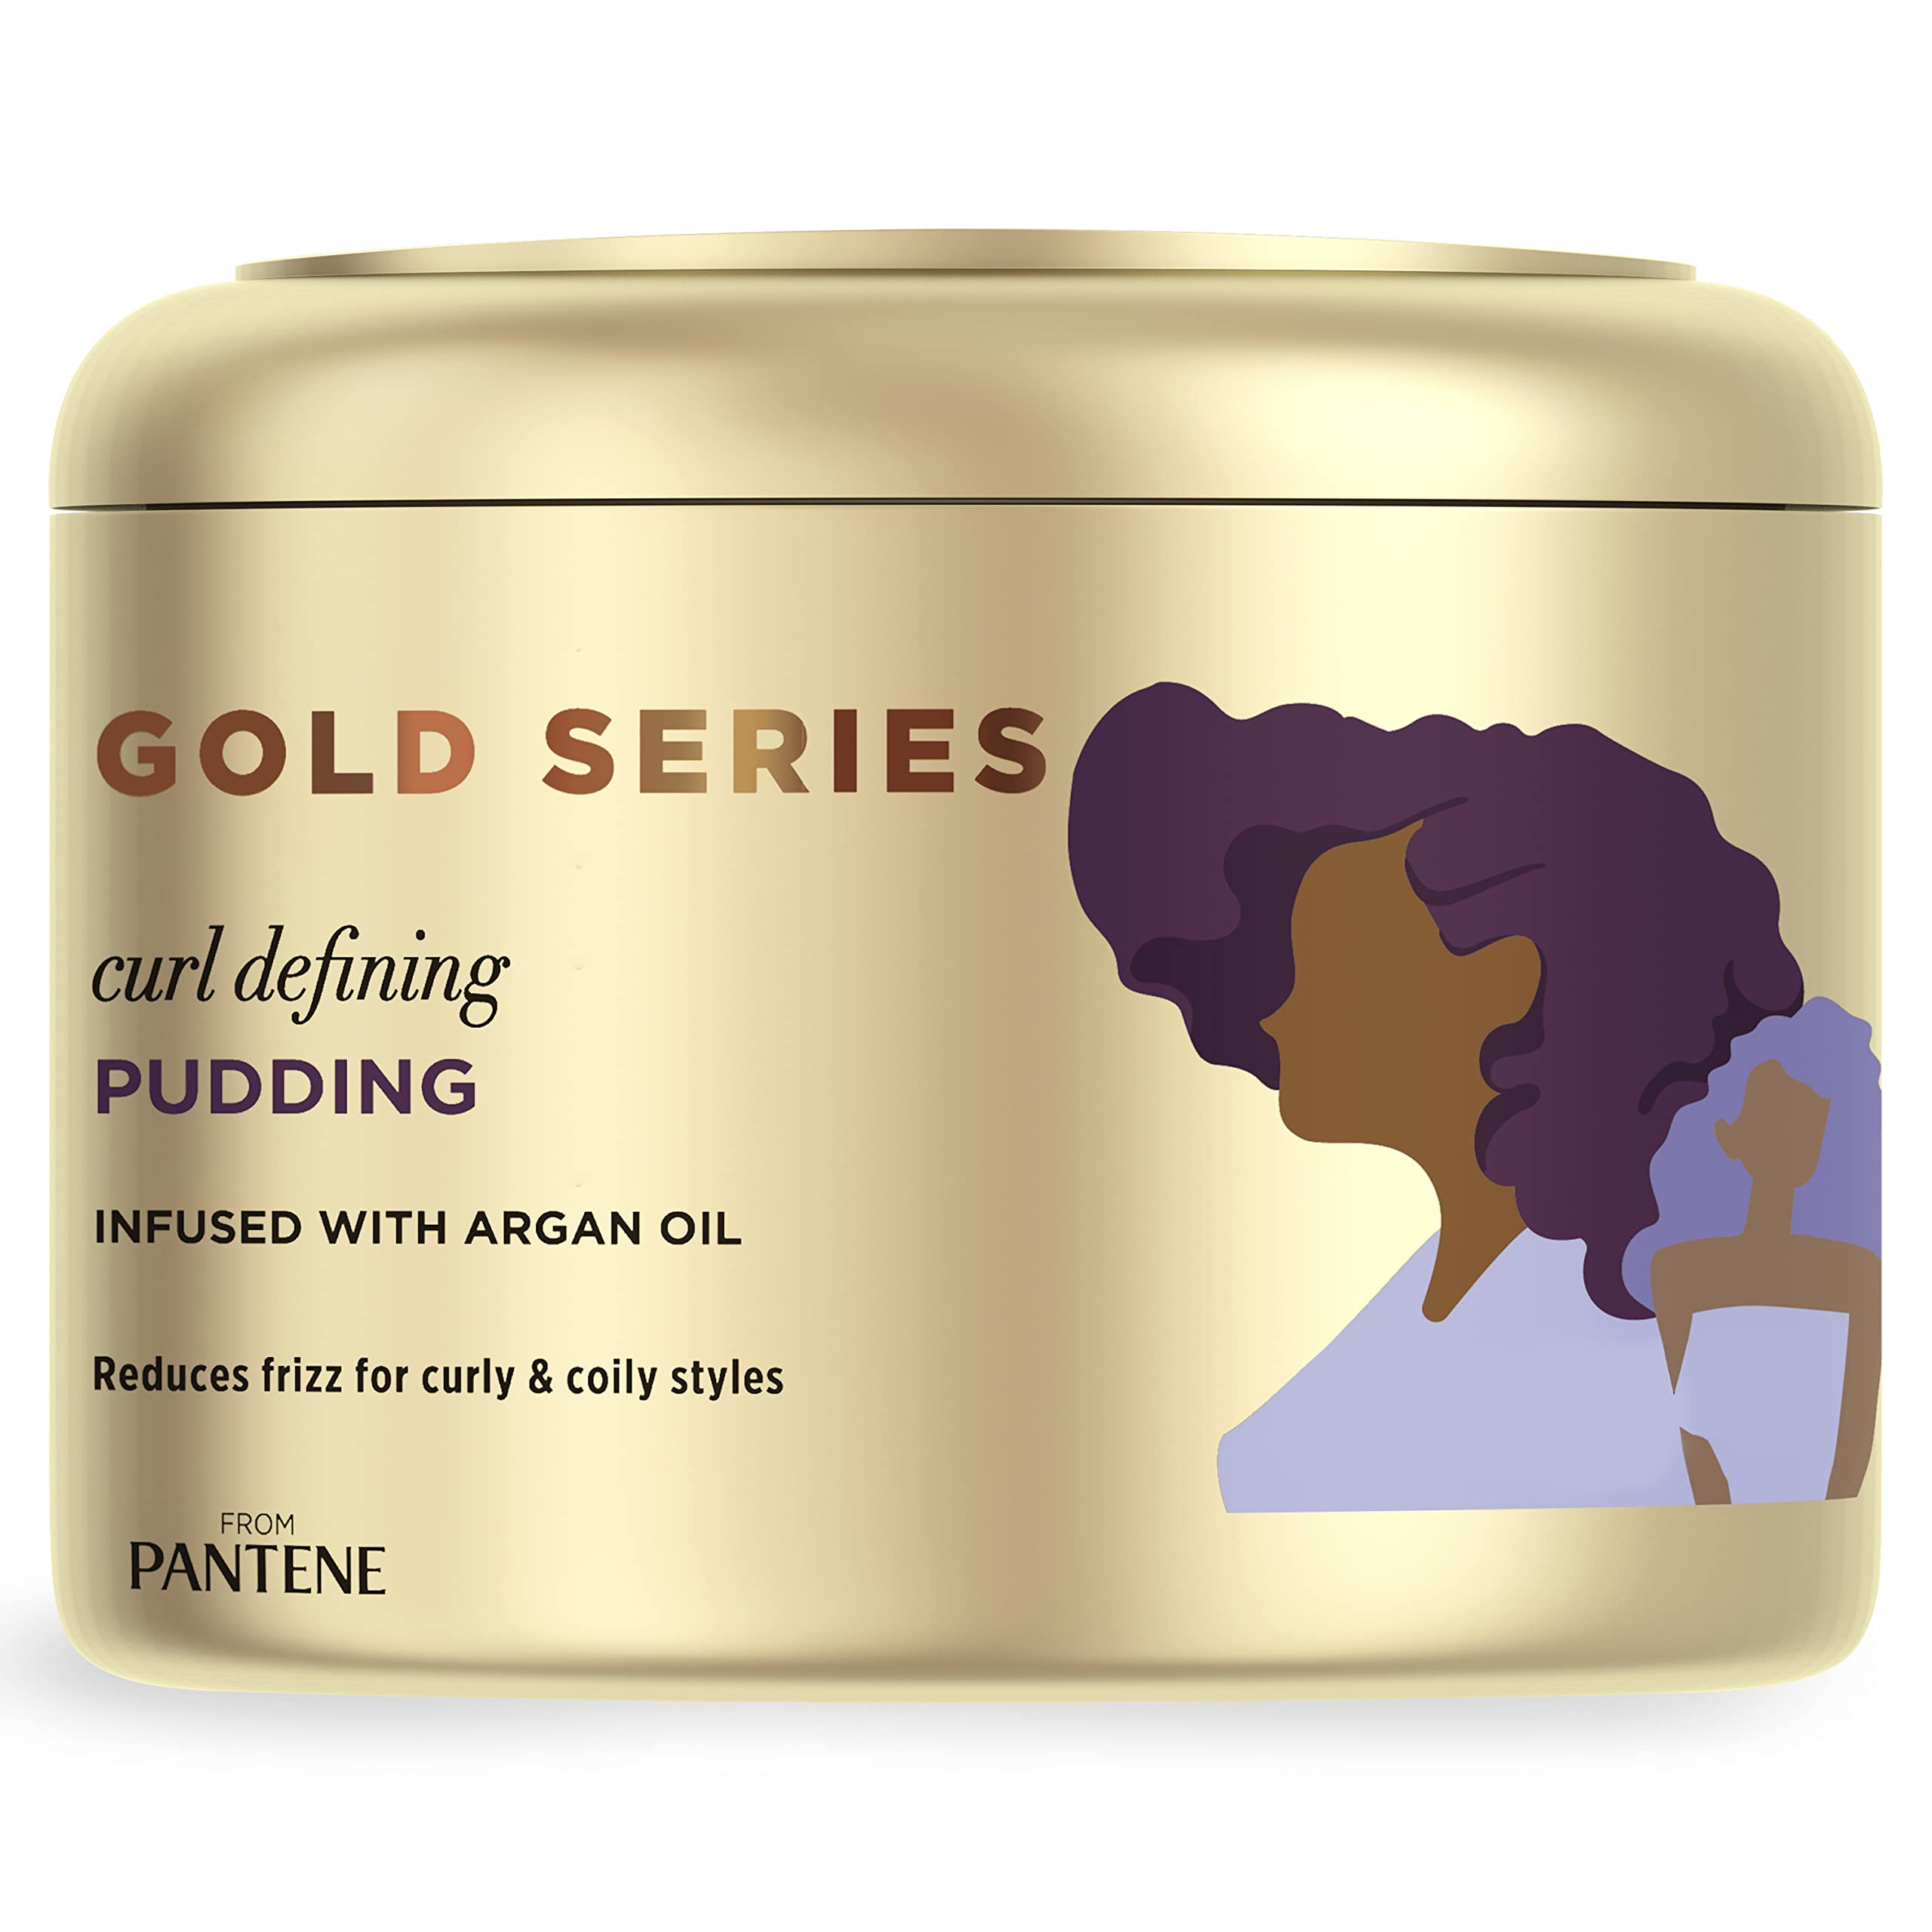 Book Cover Pantene, Hair Cream Treatment, Sulfate Free Curl Defining Pudding, Pro-V Gold Series, for Natural and Curly Textured Hair, 7.6 fl oz